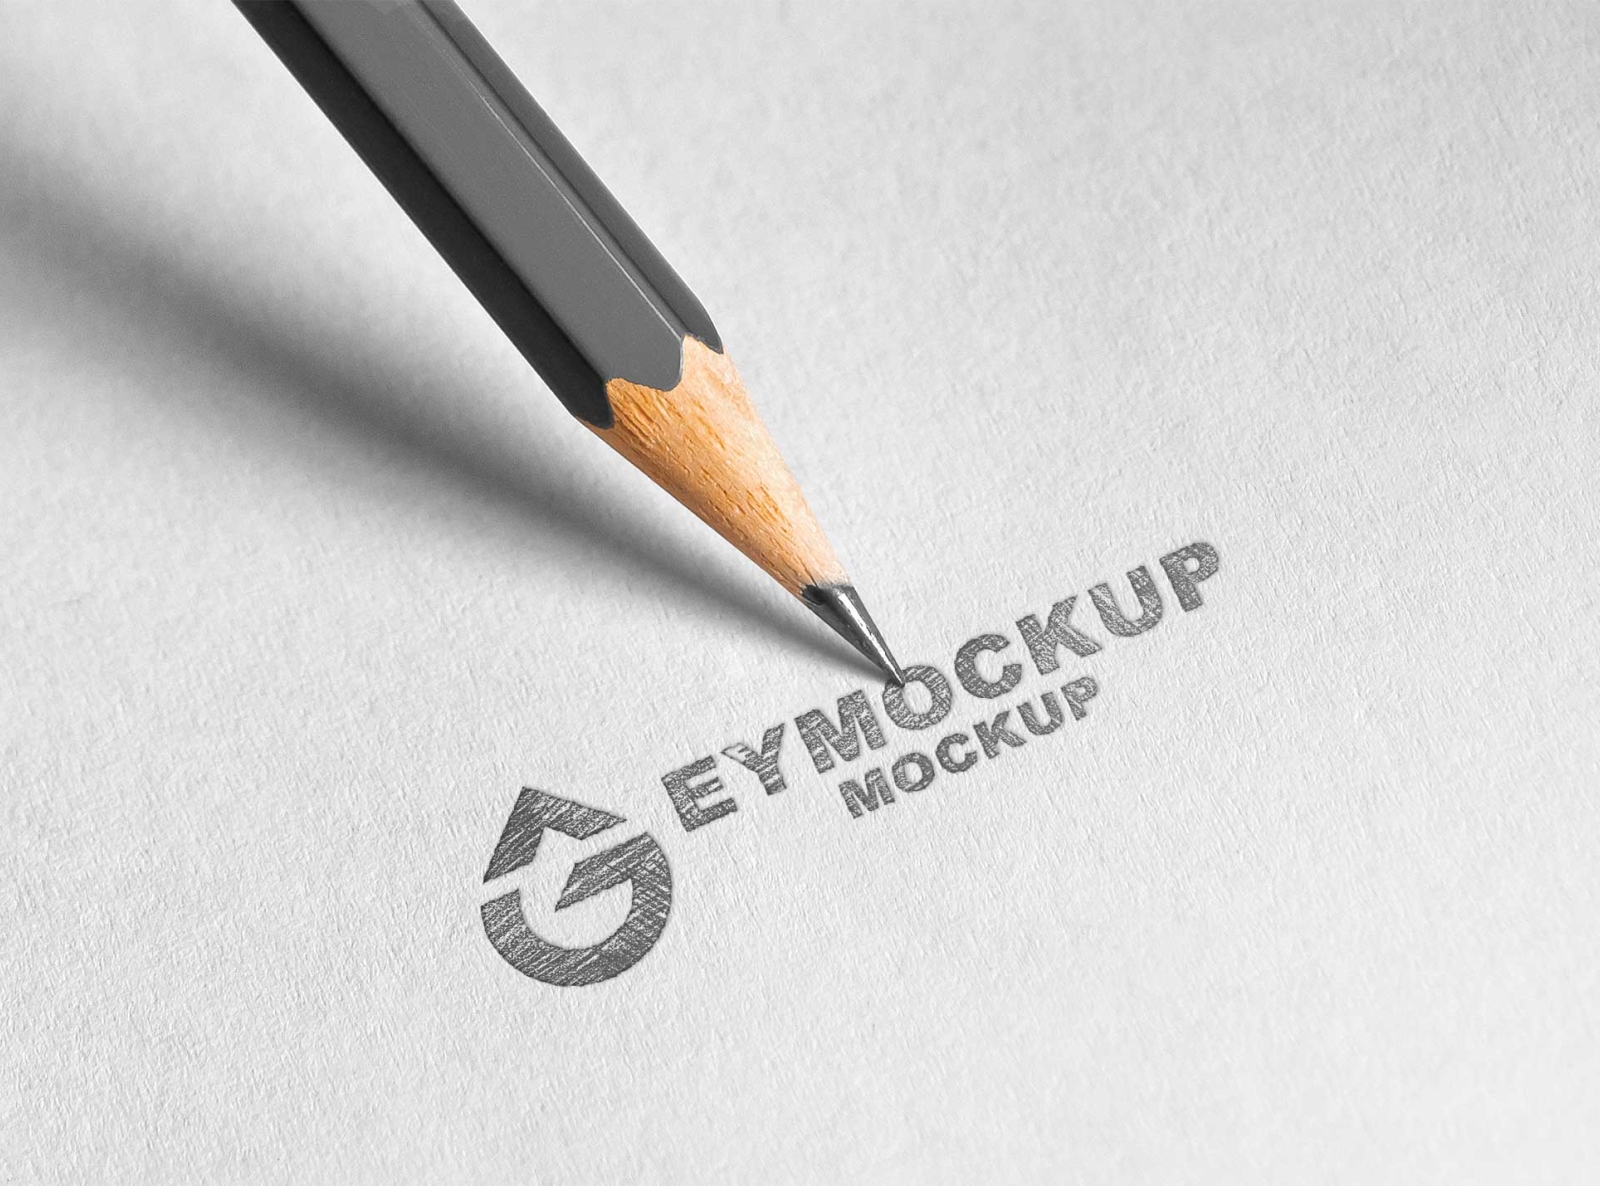 Sketch Logo Mockup PSD, 51,000+ High Quality Free PSD Templates for Download